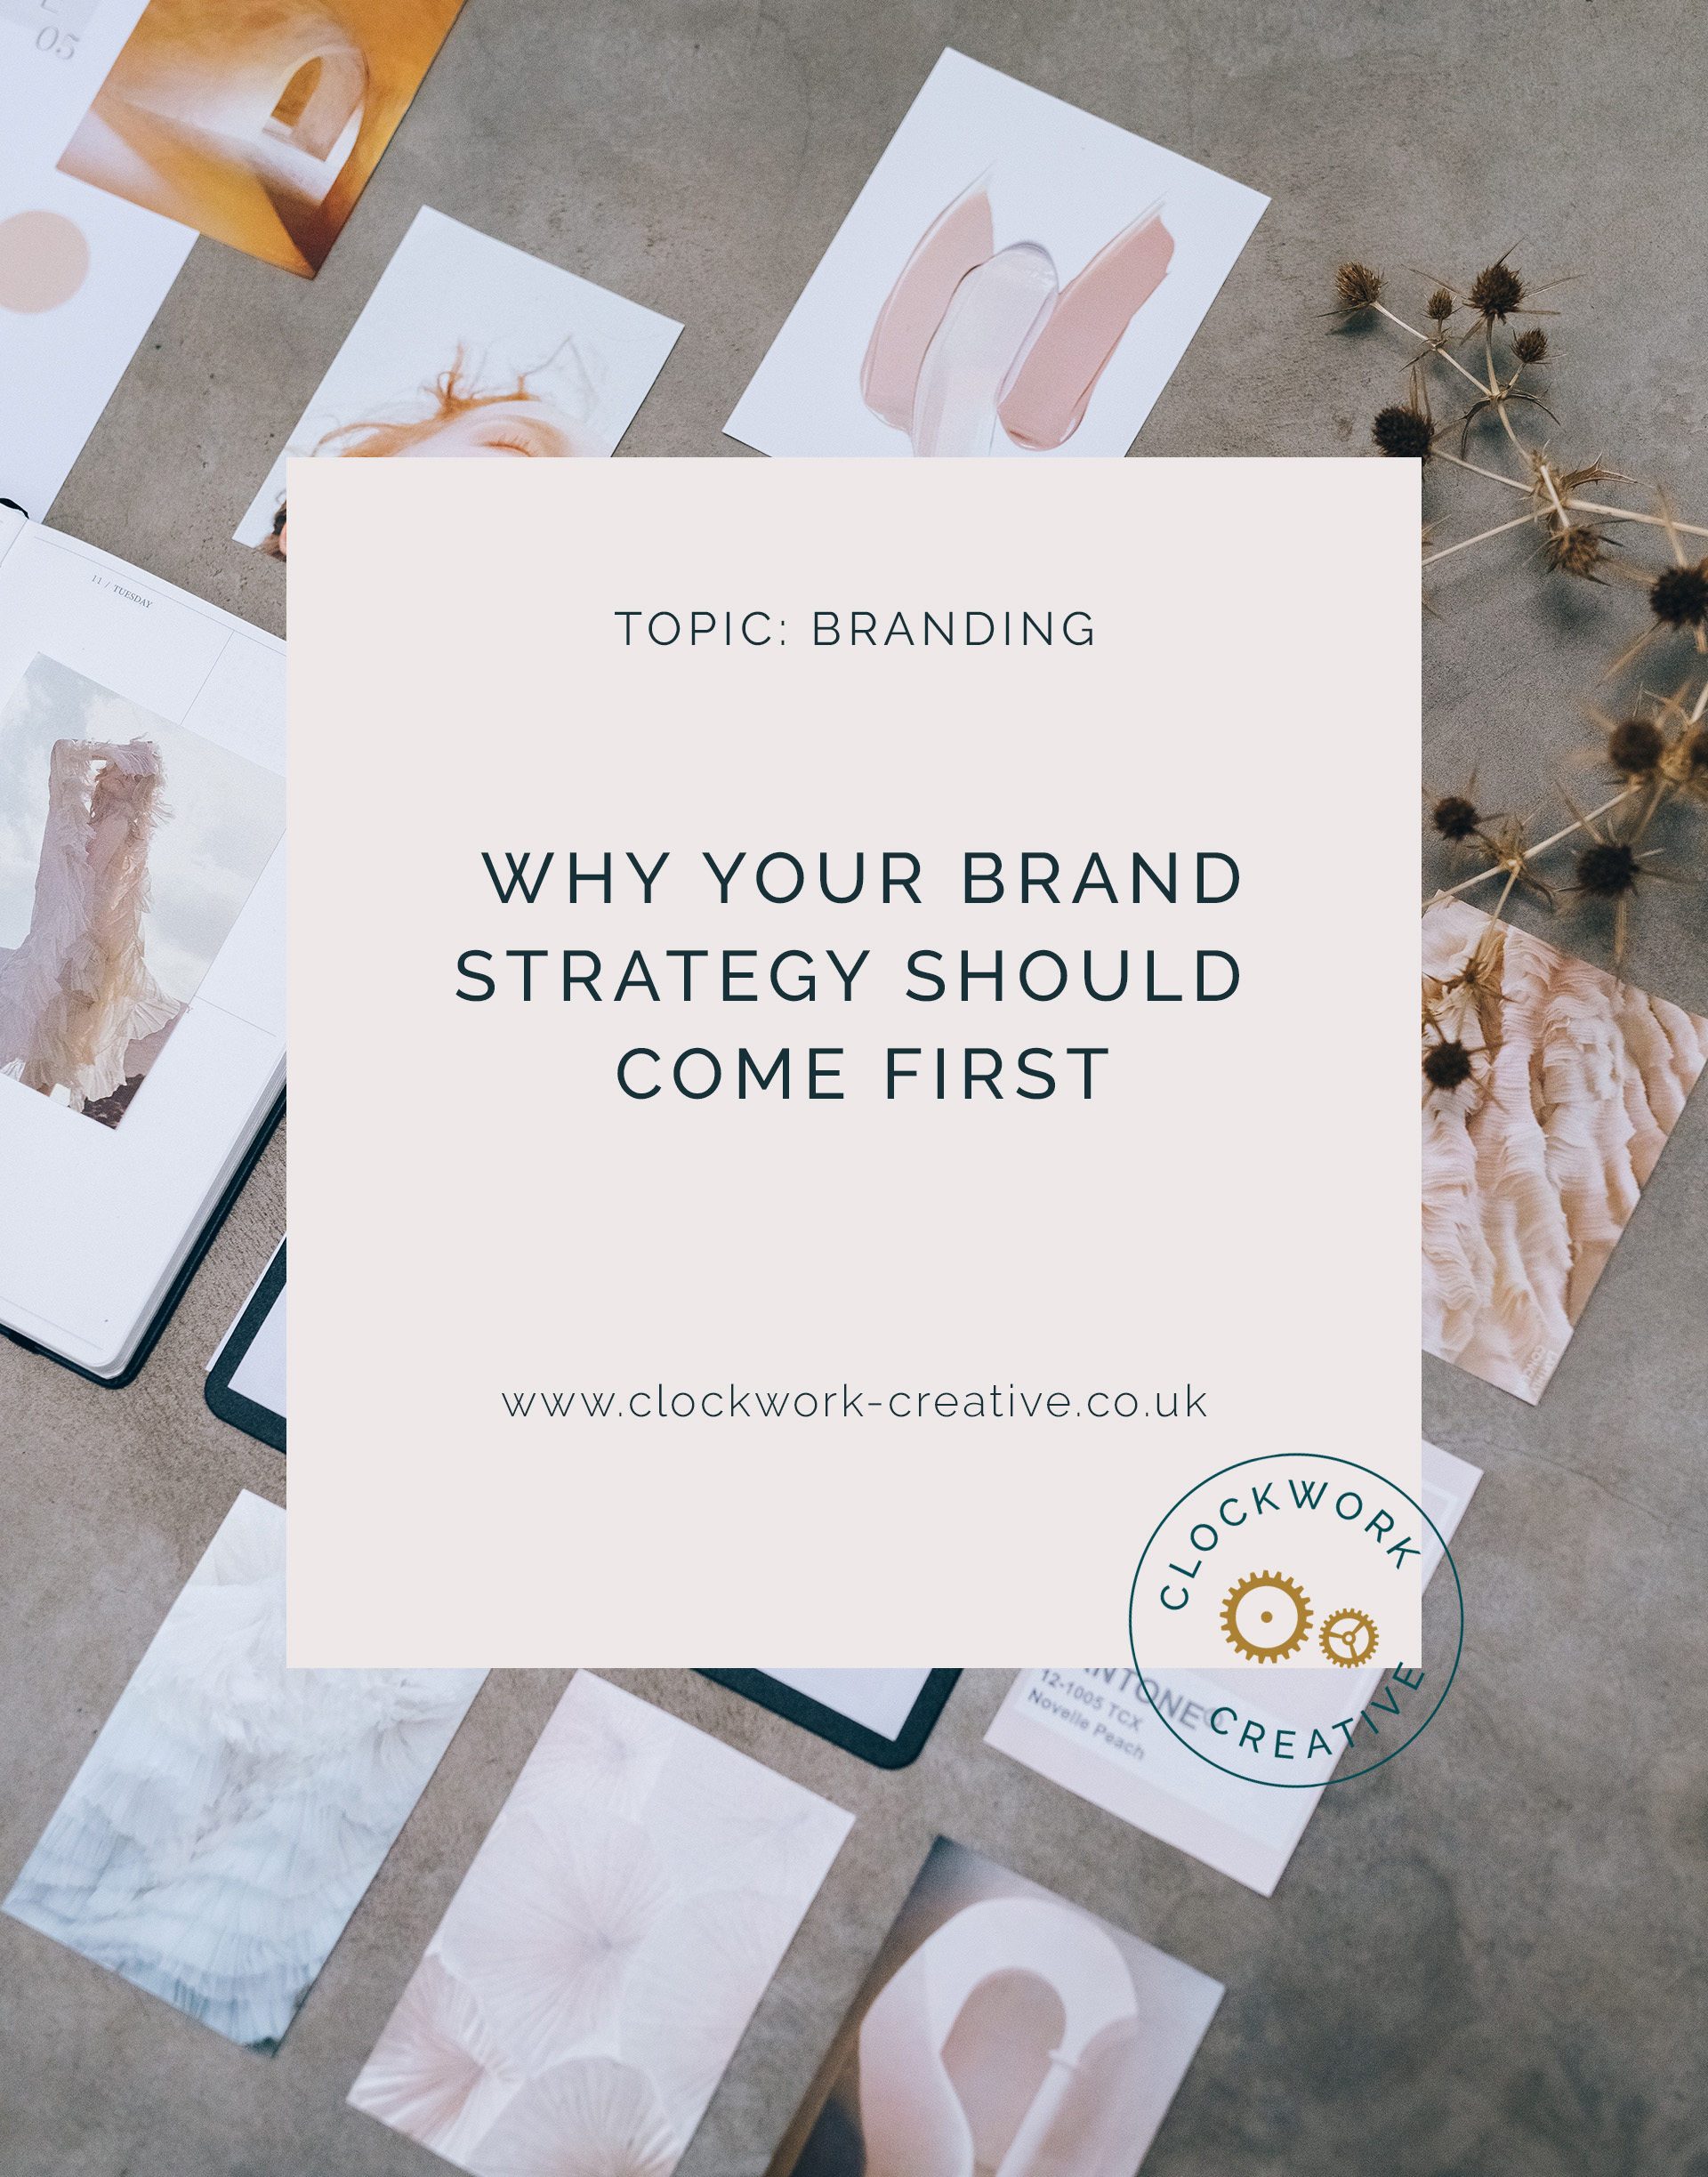 Why your brand strategy should come first